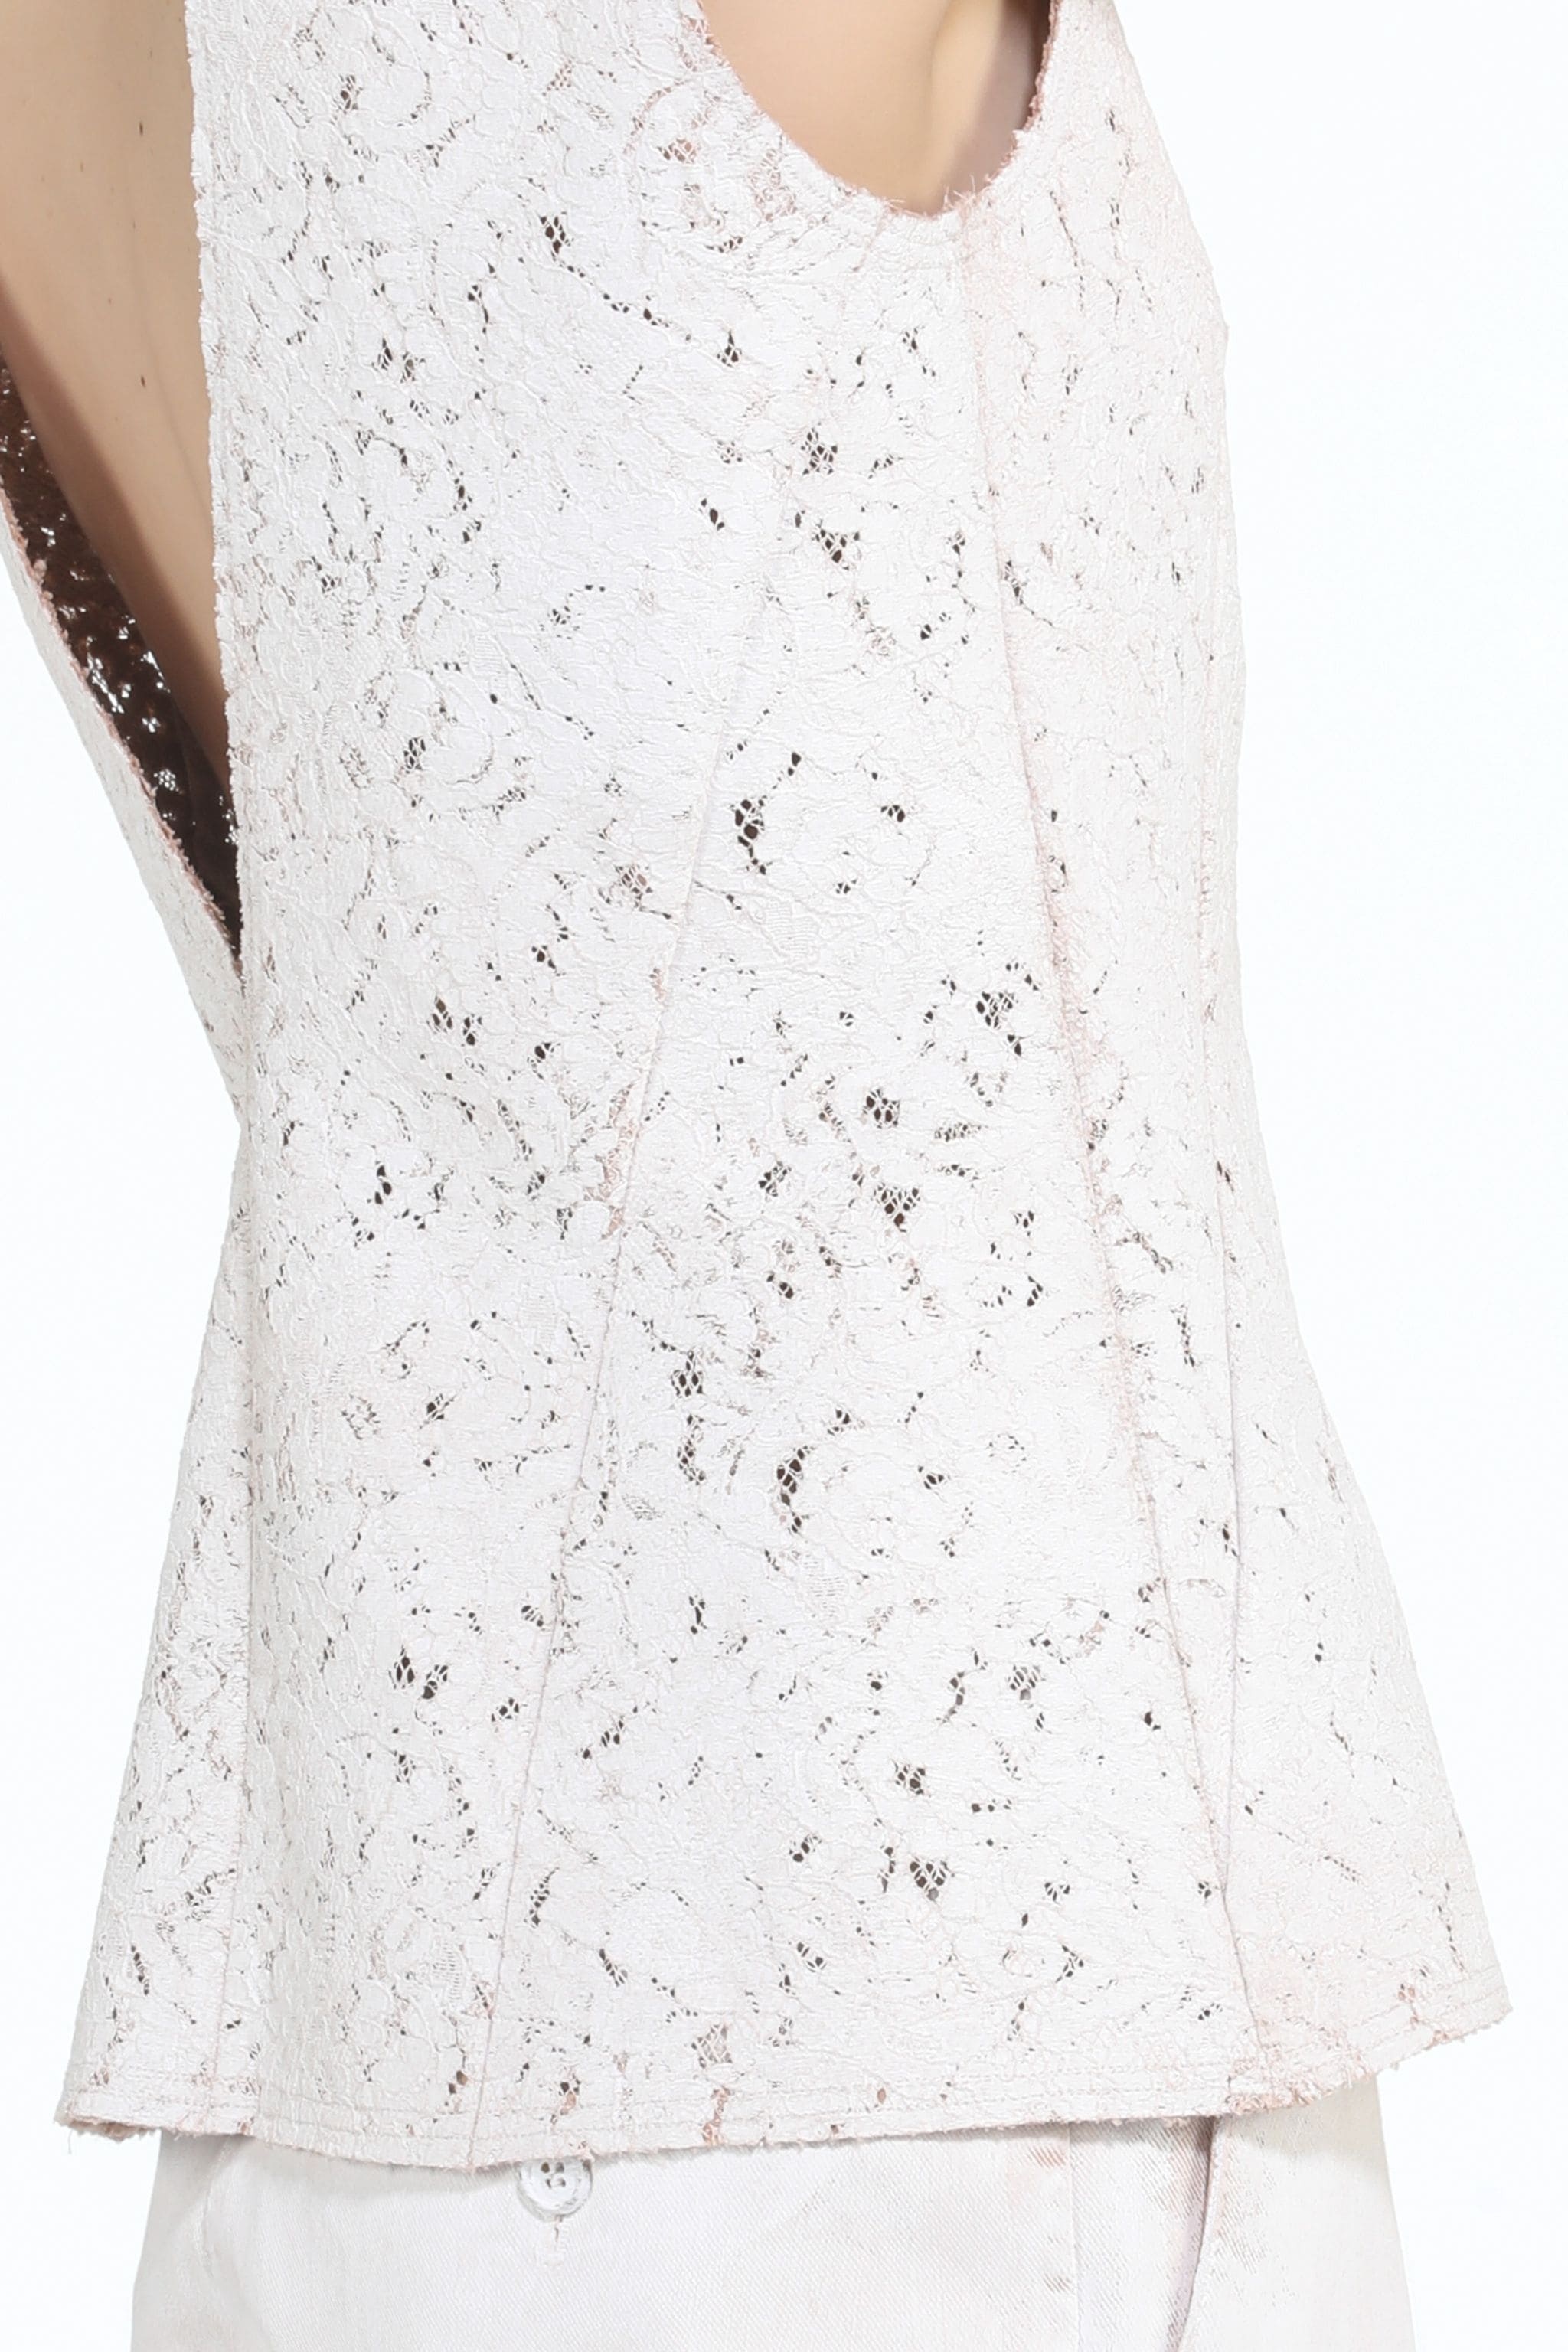 SLEEVELESS LACE TOP - 5